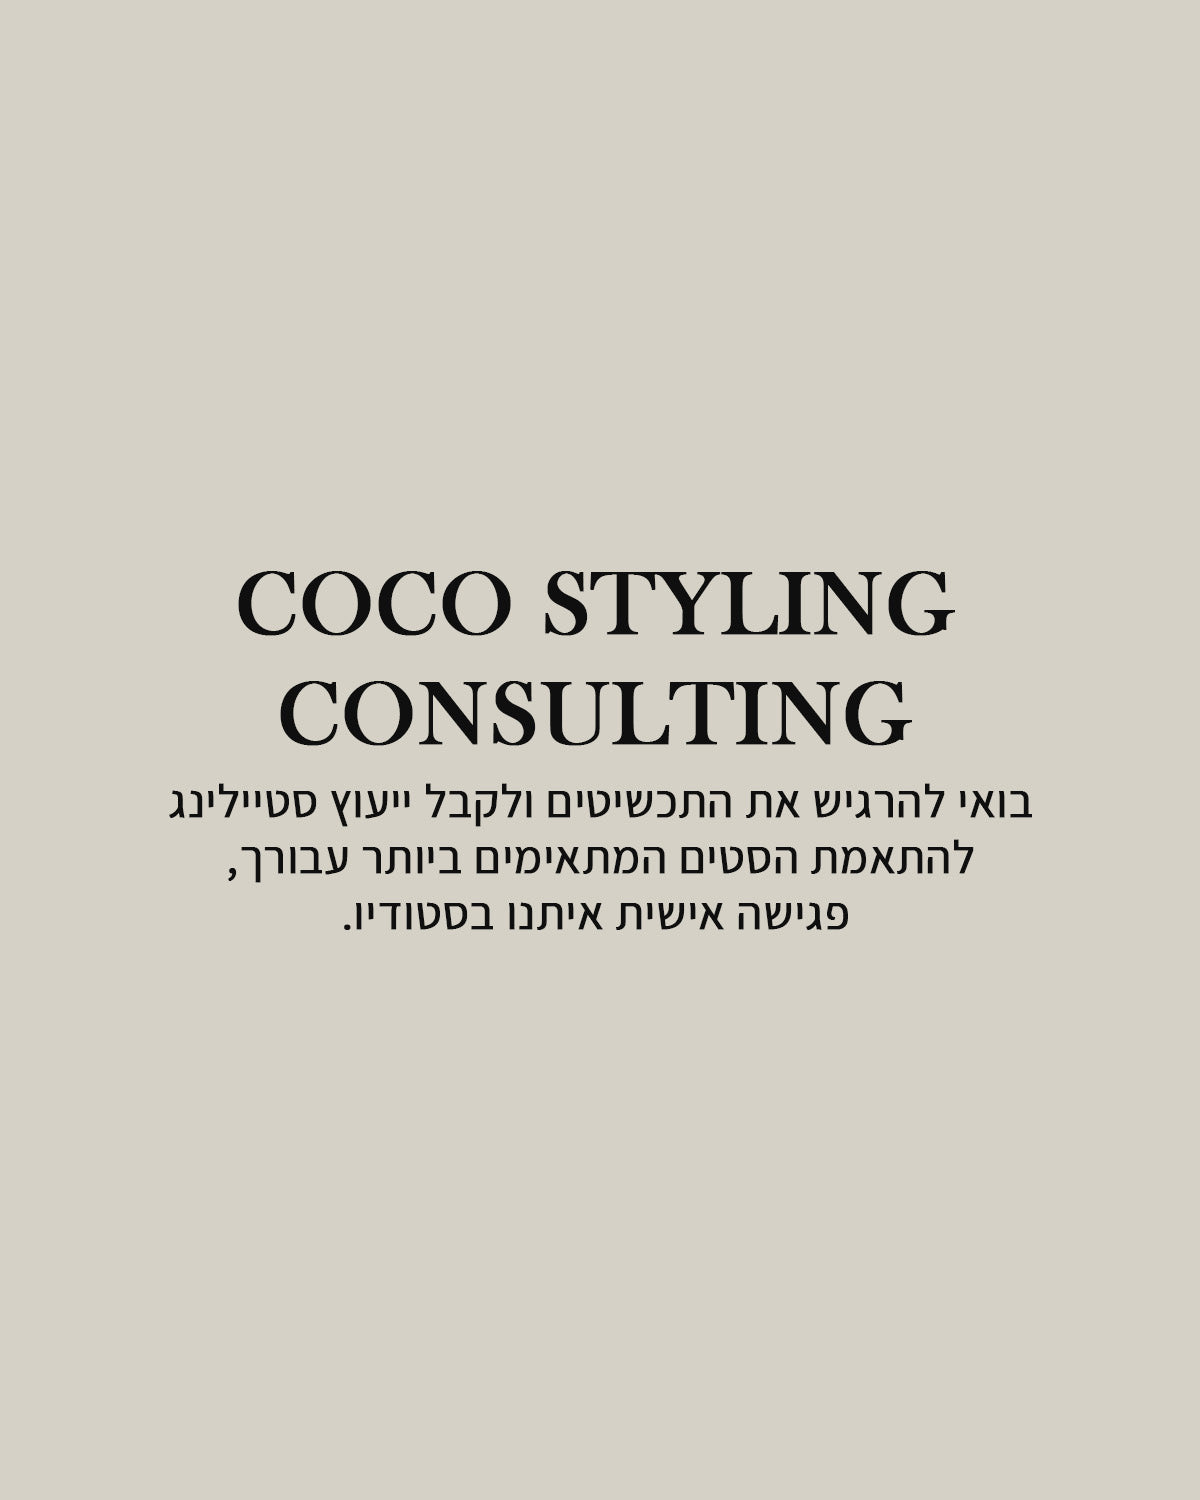 COCO STYLING CONSULTING